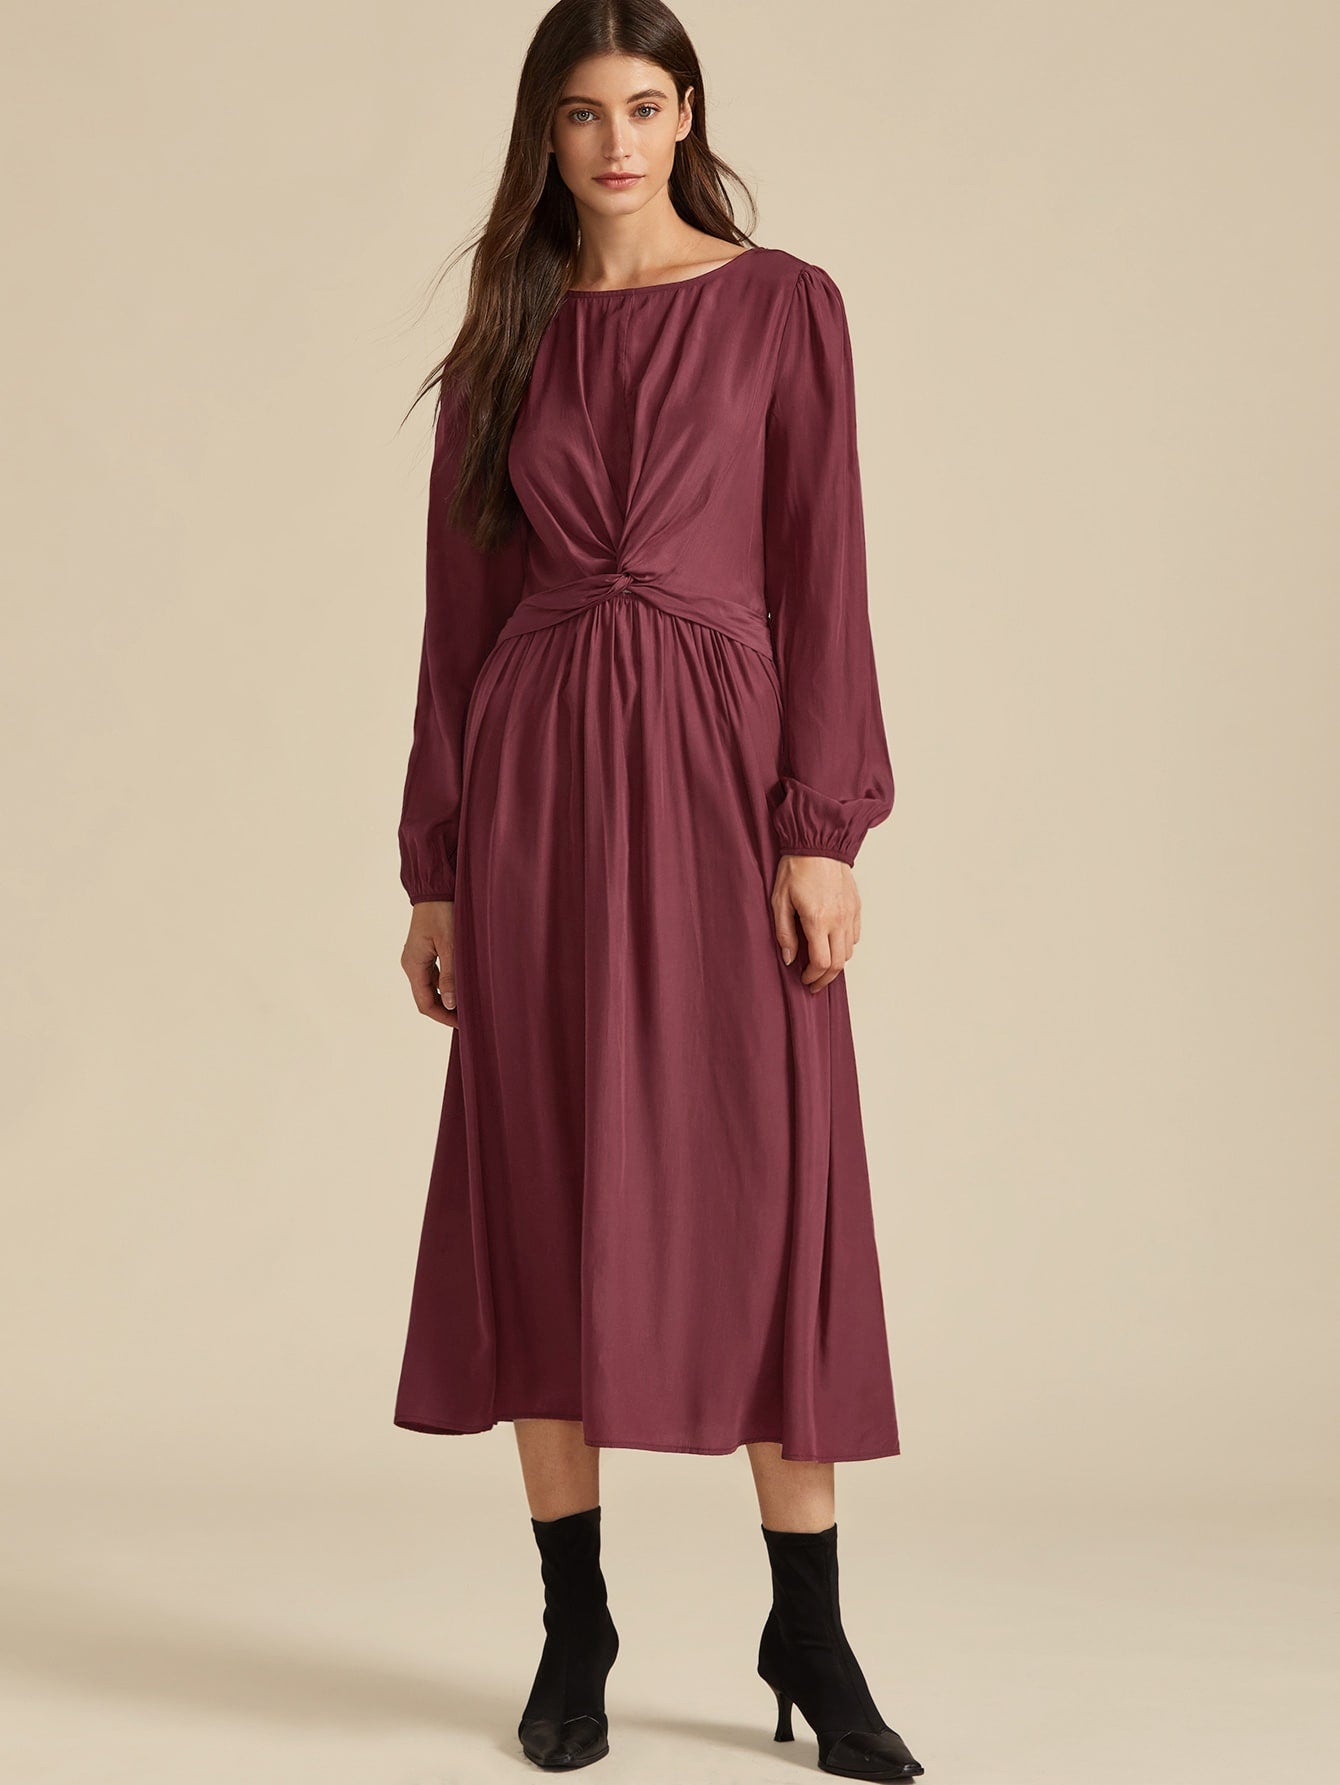 Twist Front Shirred Back A-line Dress | Amy's Cart Singapore